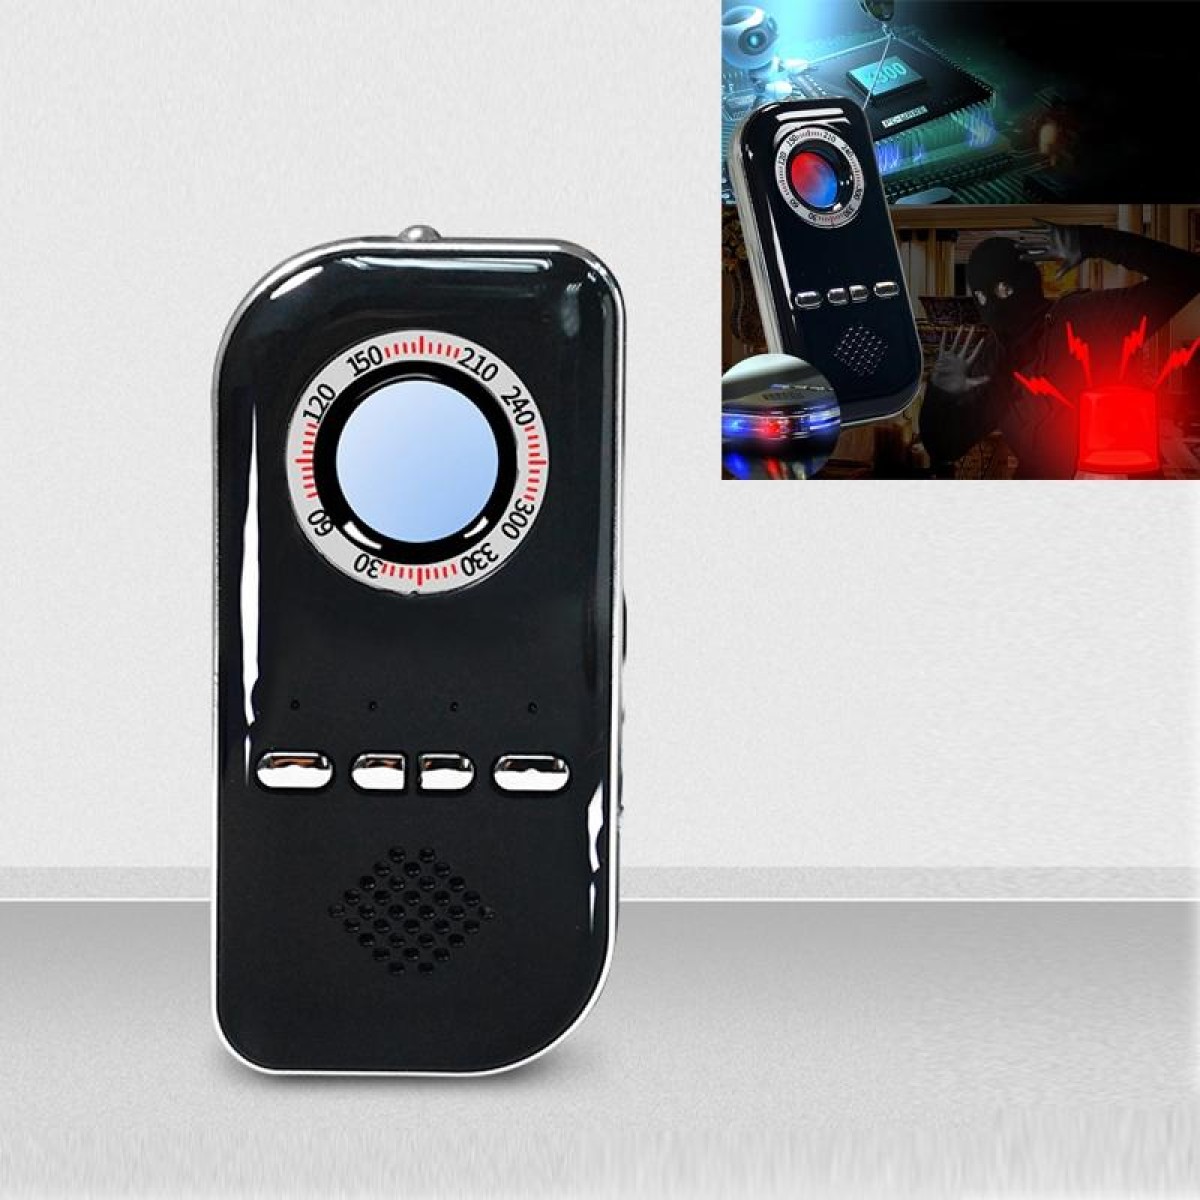 K300 Multifunctional Infrared Detector Ziguang Banknote Detector Hotel Anti-snooping Detection Travel Compass Anti-lost Device(Black)